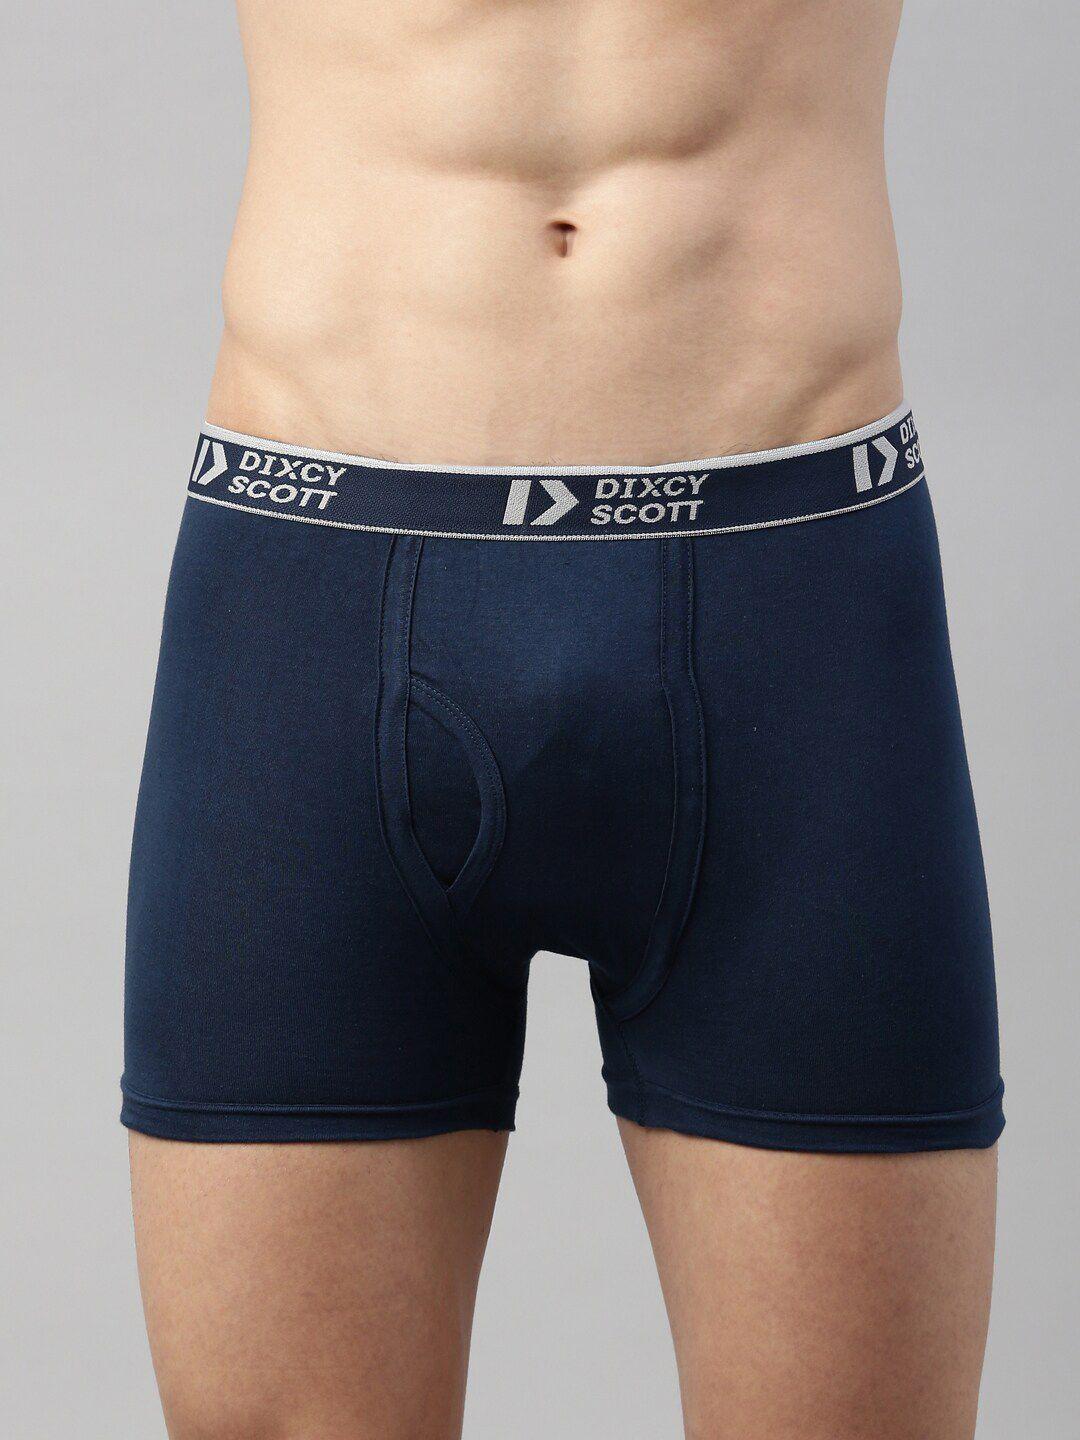 dixcy scott men navy blue solid pure cotton trunk dso-cross trunk-p1